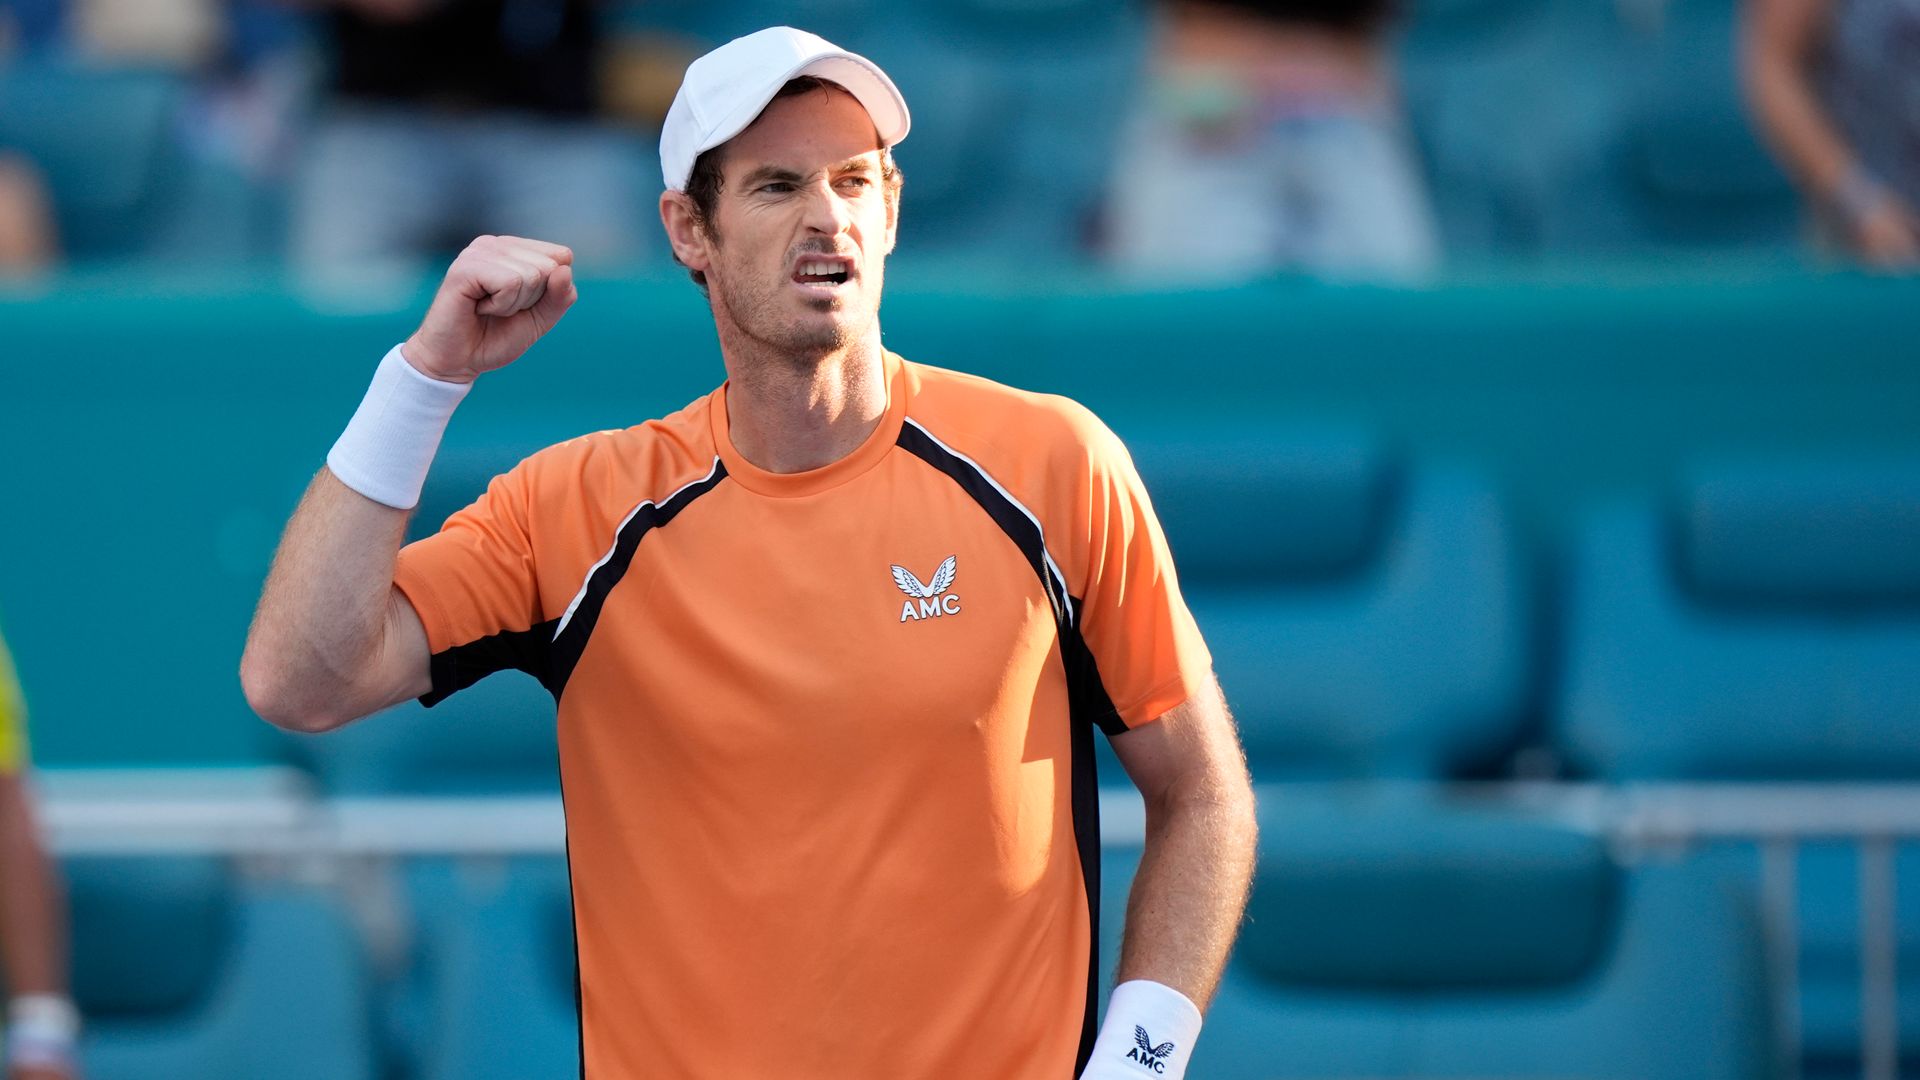 Miami Open: Murray wins after Berrettini nearly faints on court